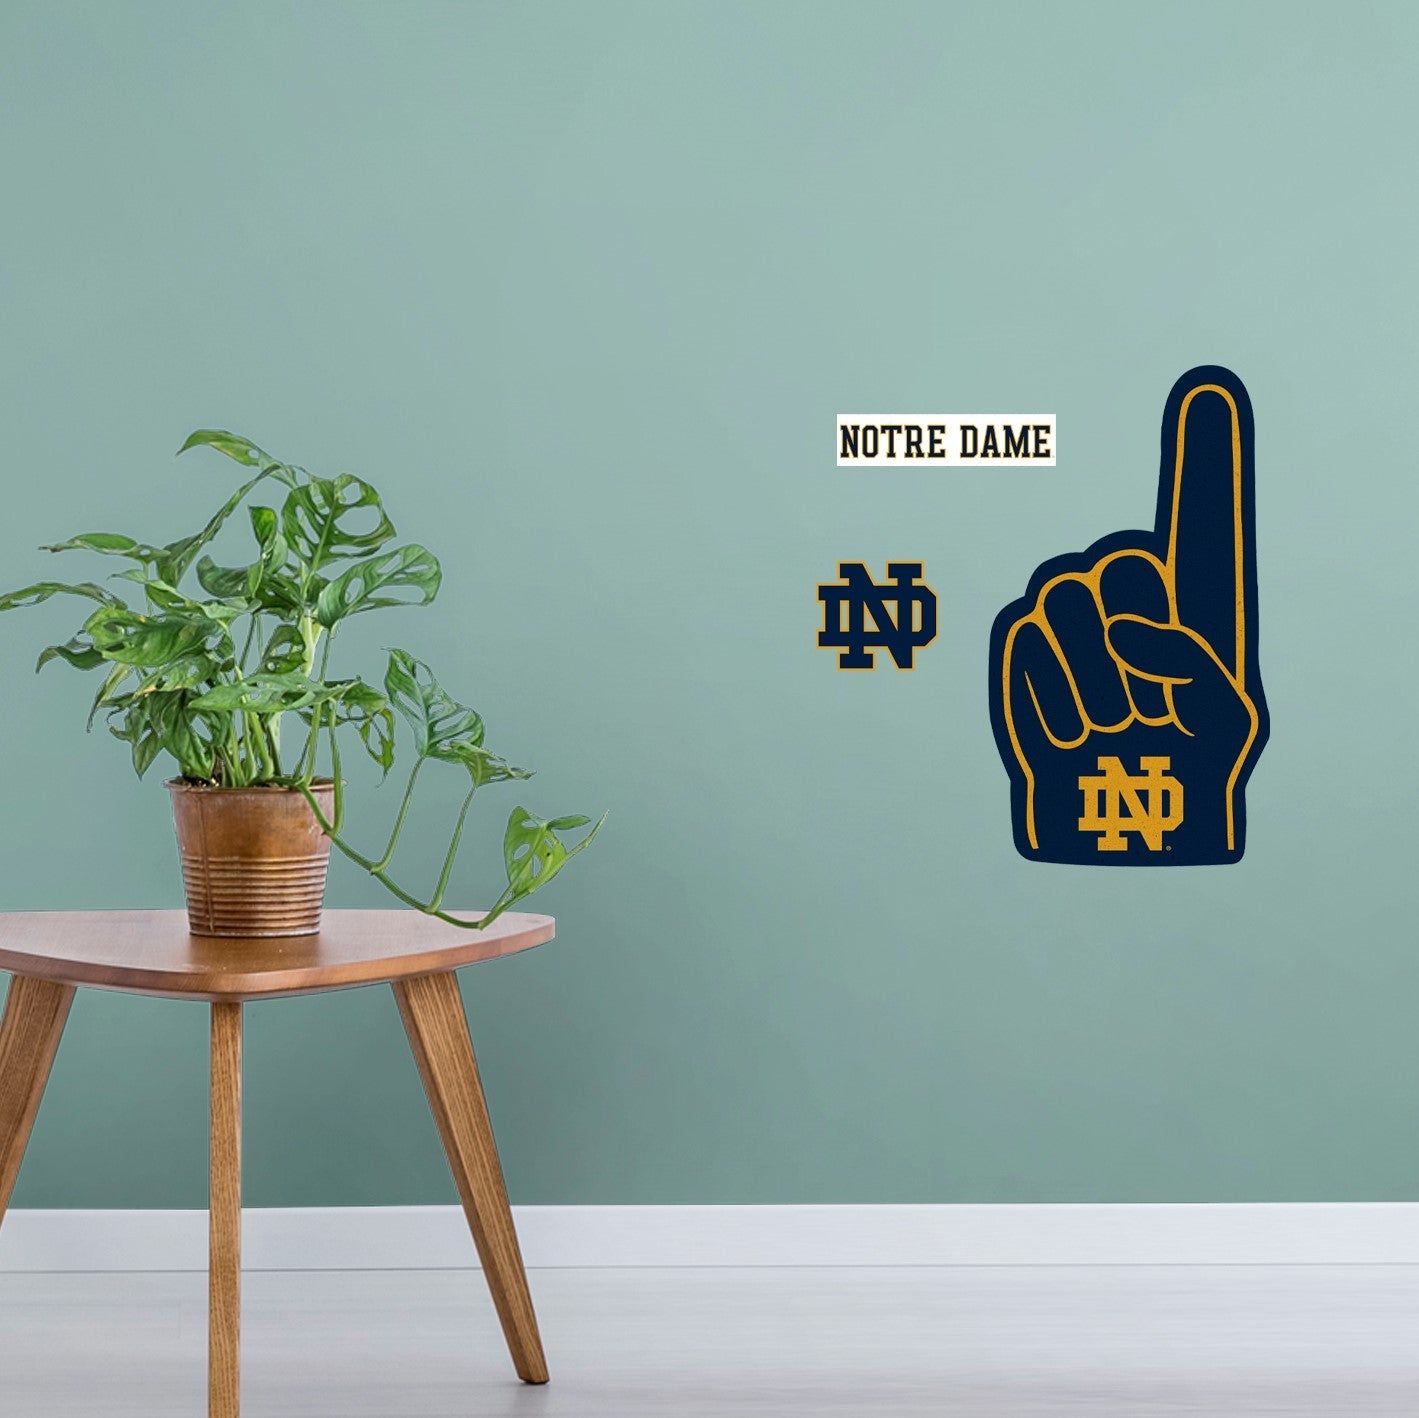 Notre Dame Fighting Irish: ND Foam Finger - Officially Licensed NCAA Removable Adhesive Decal